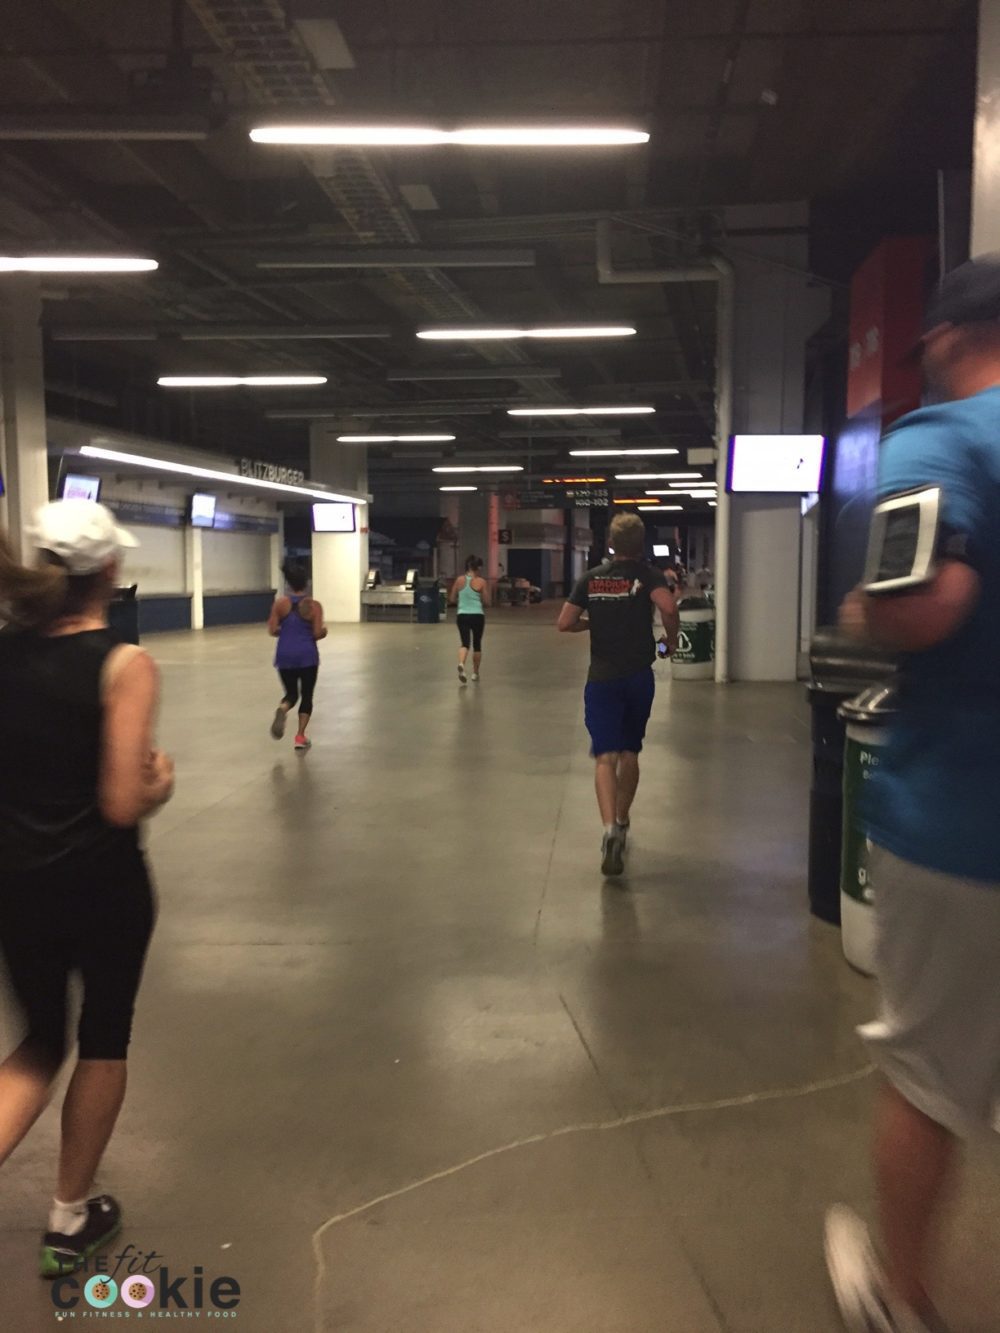 Looking for a fun event in Colorado? Check out my Broncos Stadium Challenge Recap! - #ad @24hourfitness #Rock24Life #LivetheBeat #24hourfitness #race